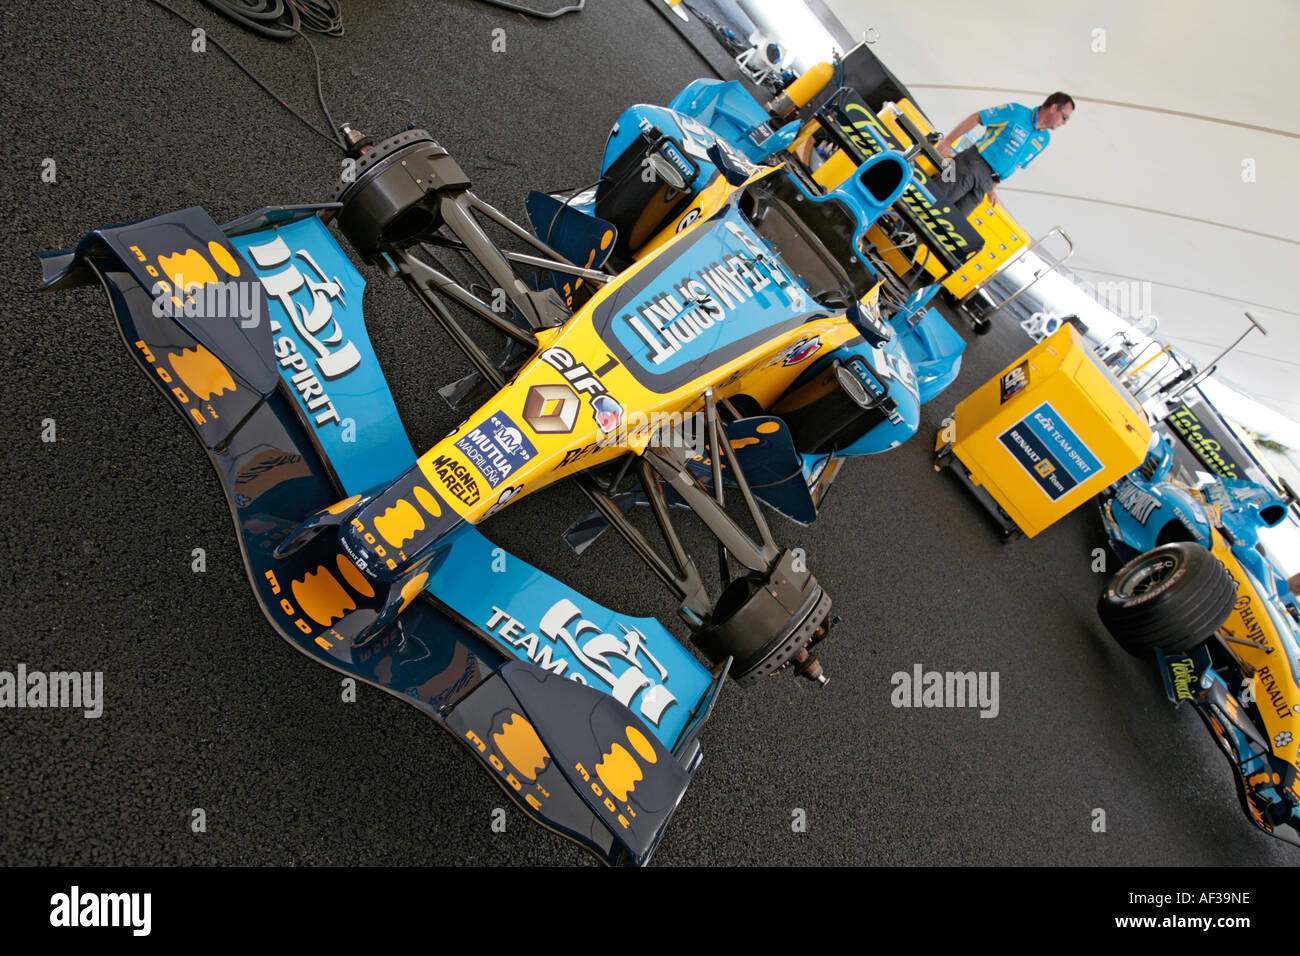 2006 Renault R26 F1 car on display at the Goodwood Festival of Speed. Stock Photo